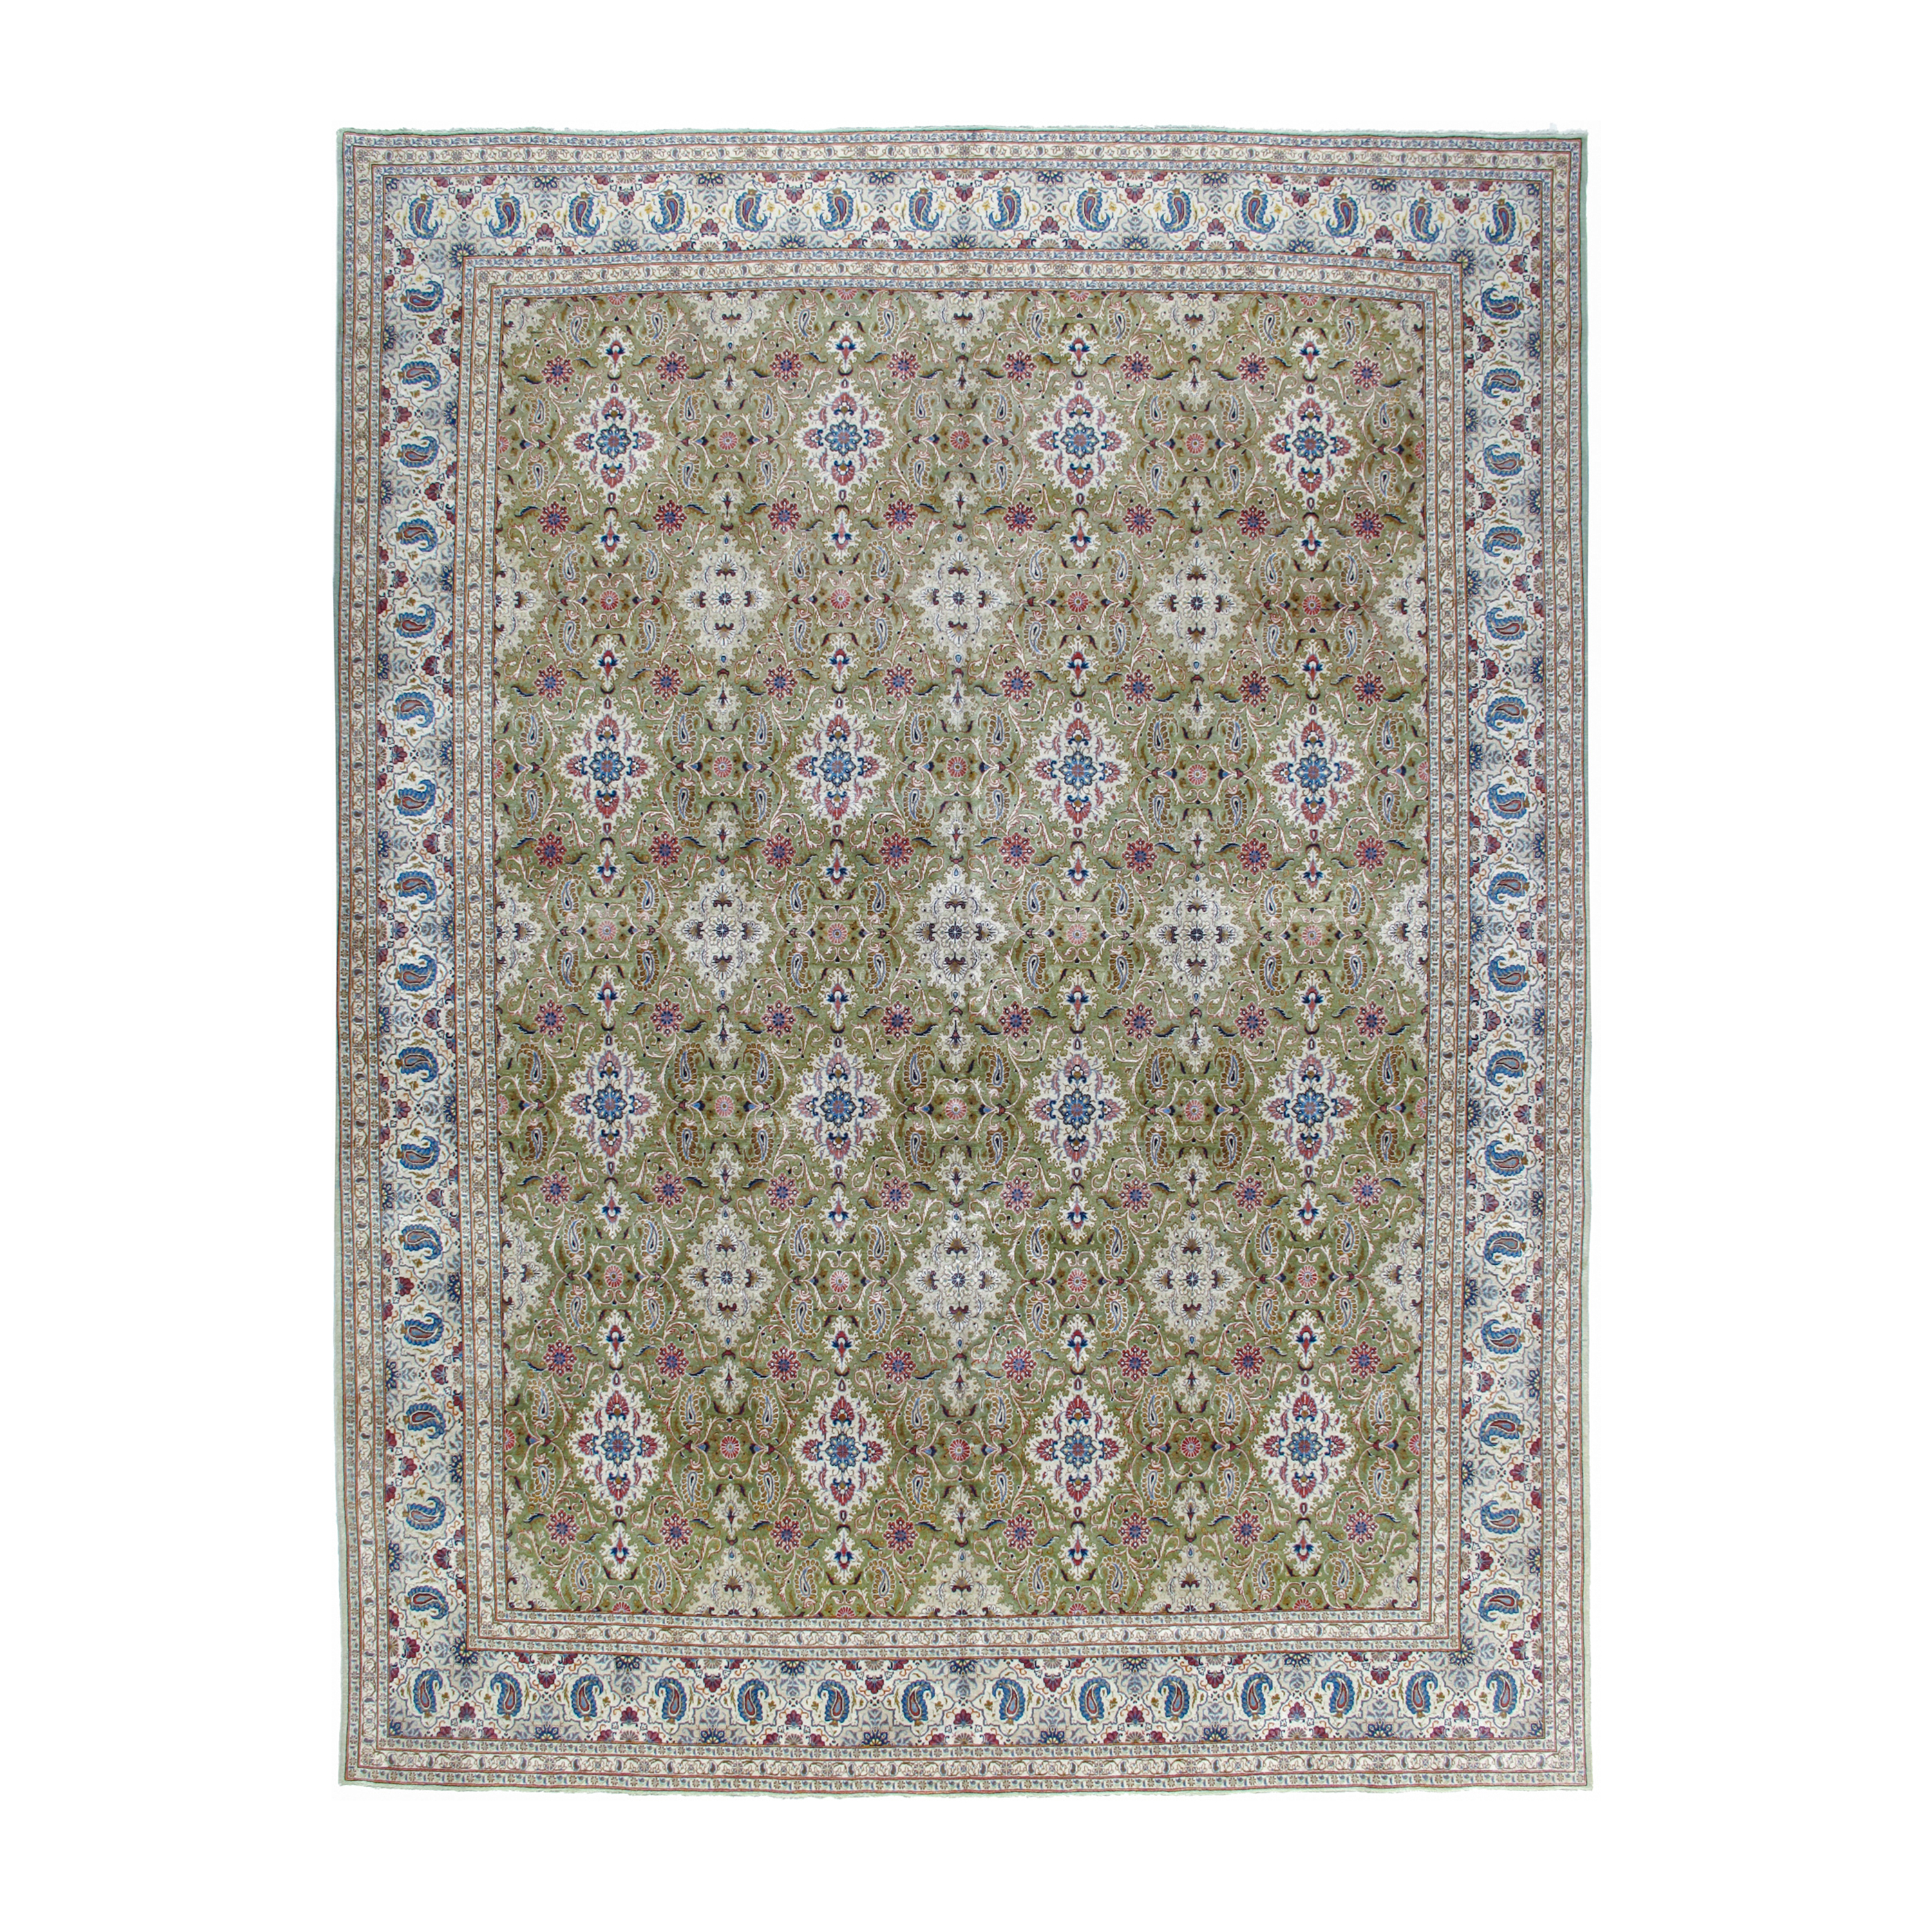 This Persian Kashan rug is made of 100% wool. 